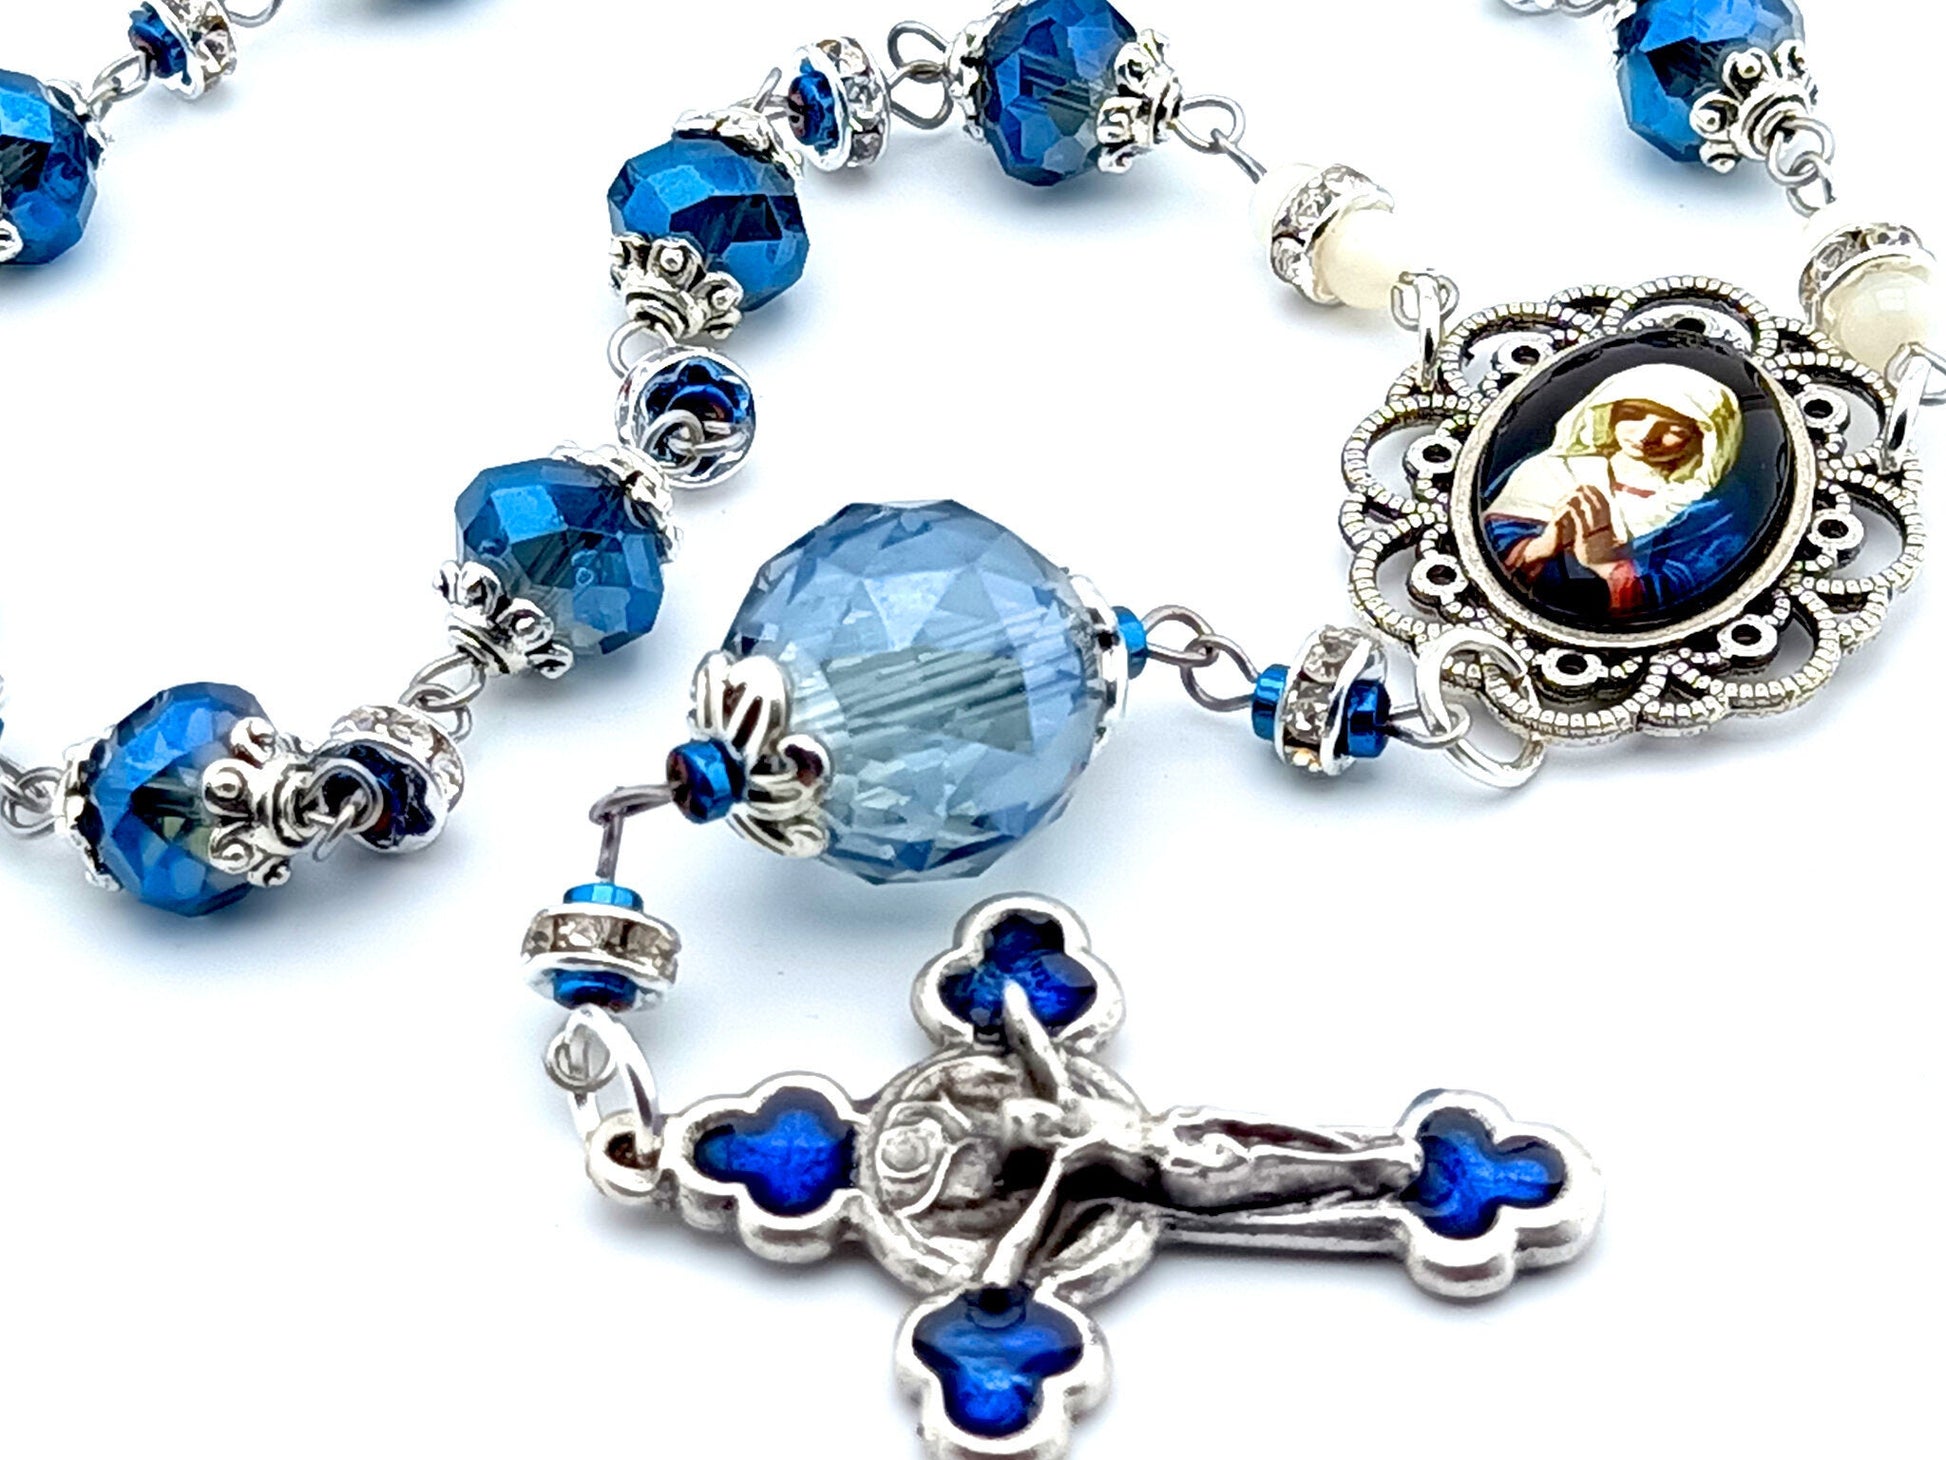 Our Lady of Sorrows unique rosary beads single decade rosary with silver blue and glass beads, silver and blue enamel crucifix and picture centre medal.